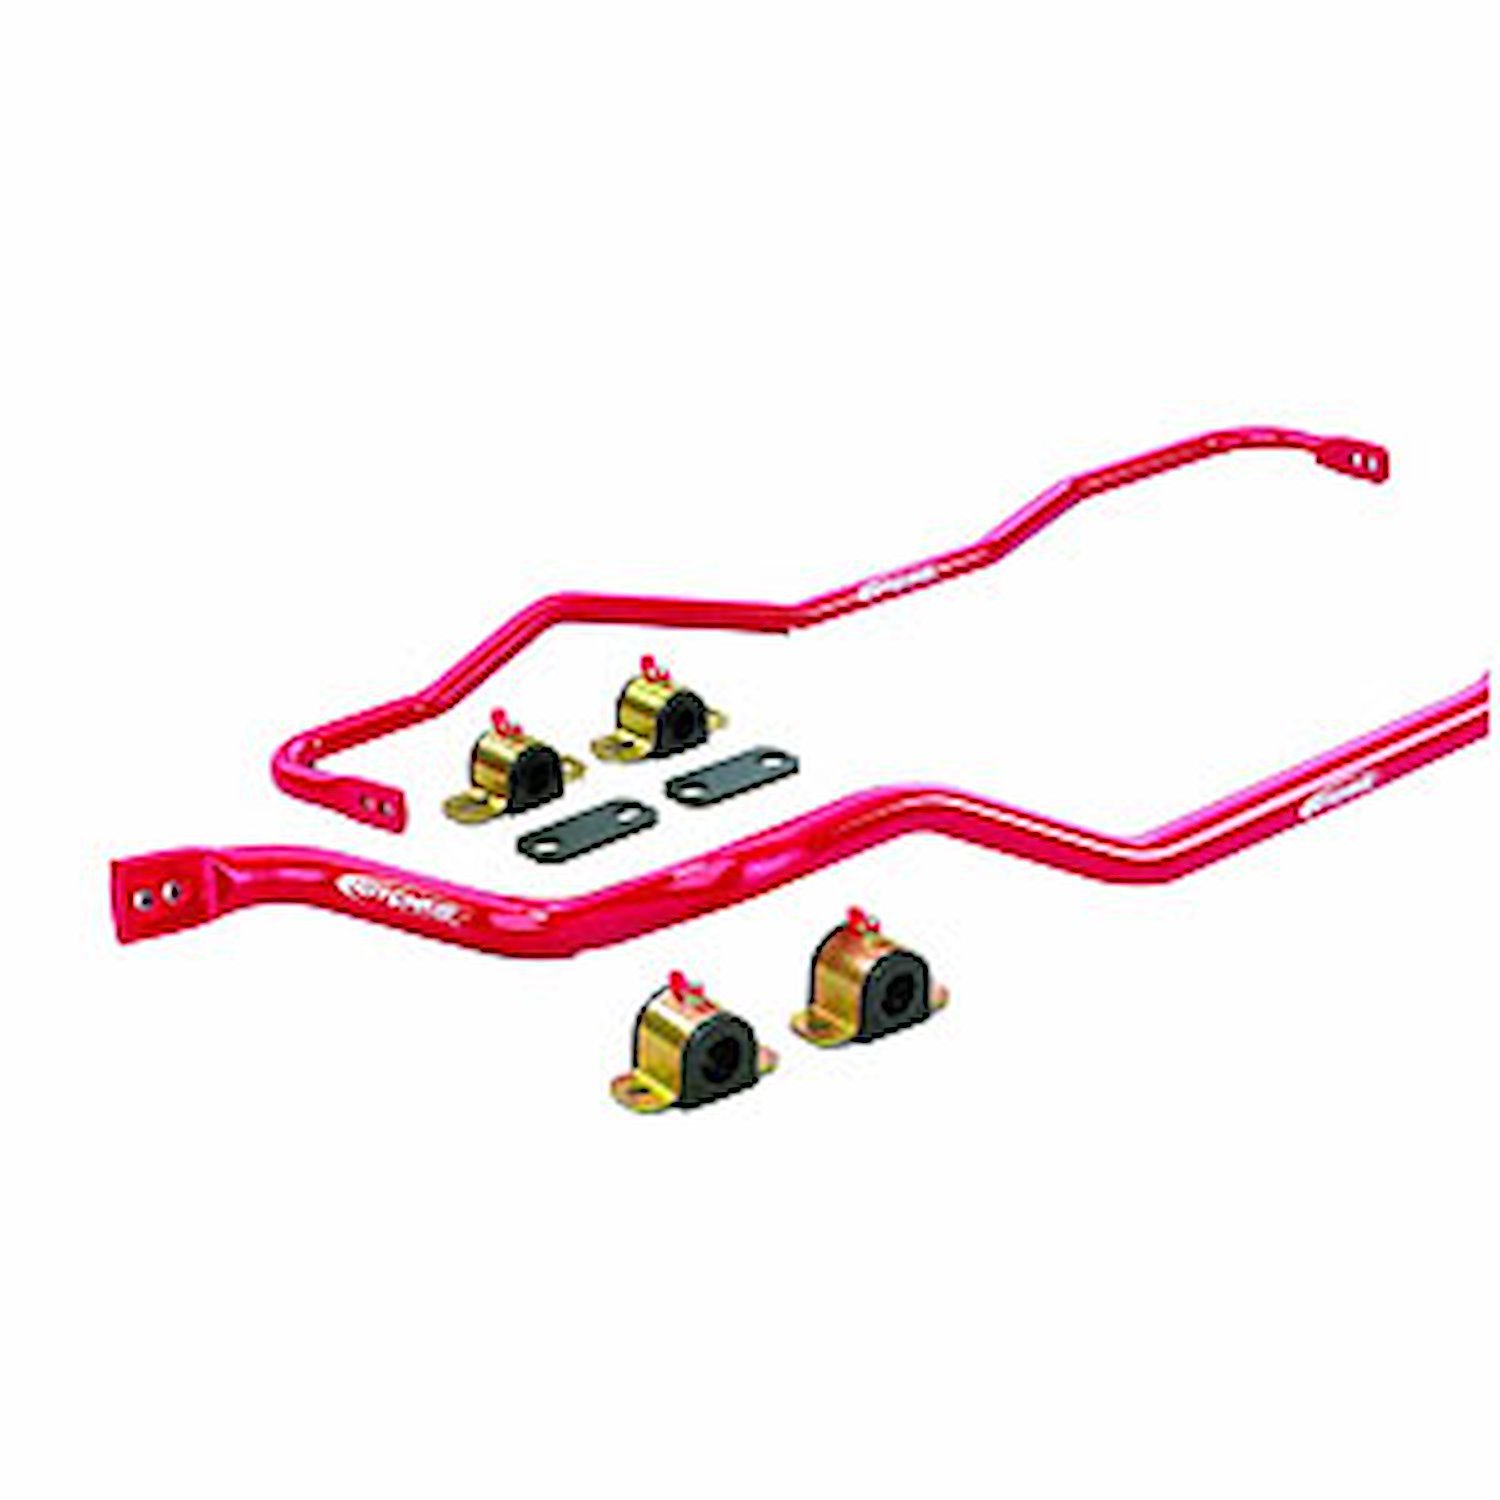 Sway Bar Kit for 2000-2005 Lexus IS300